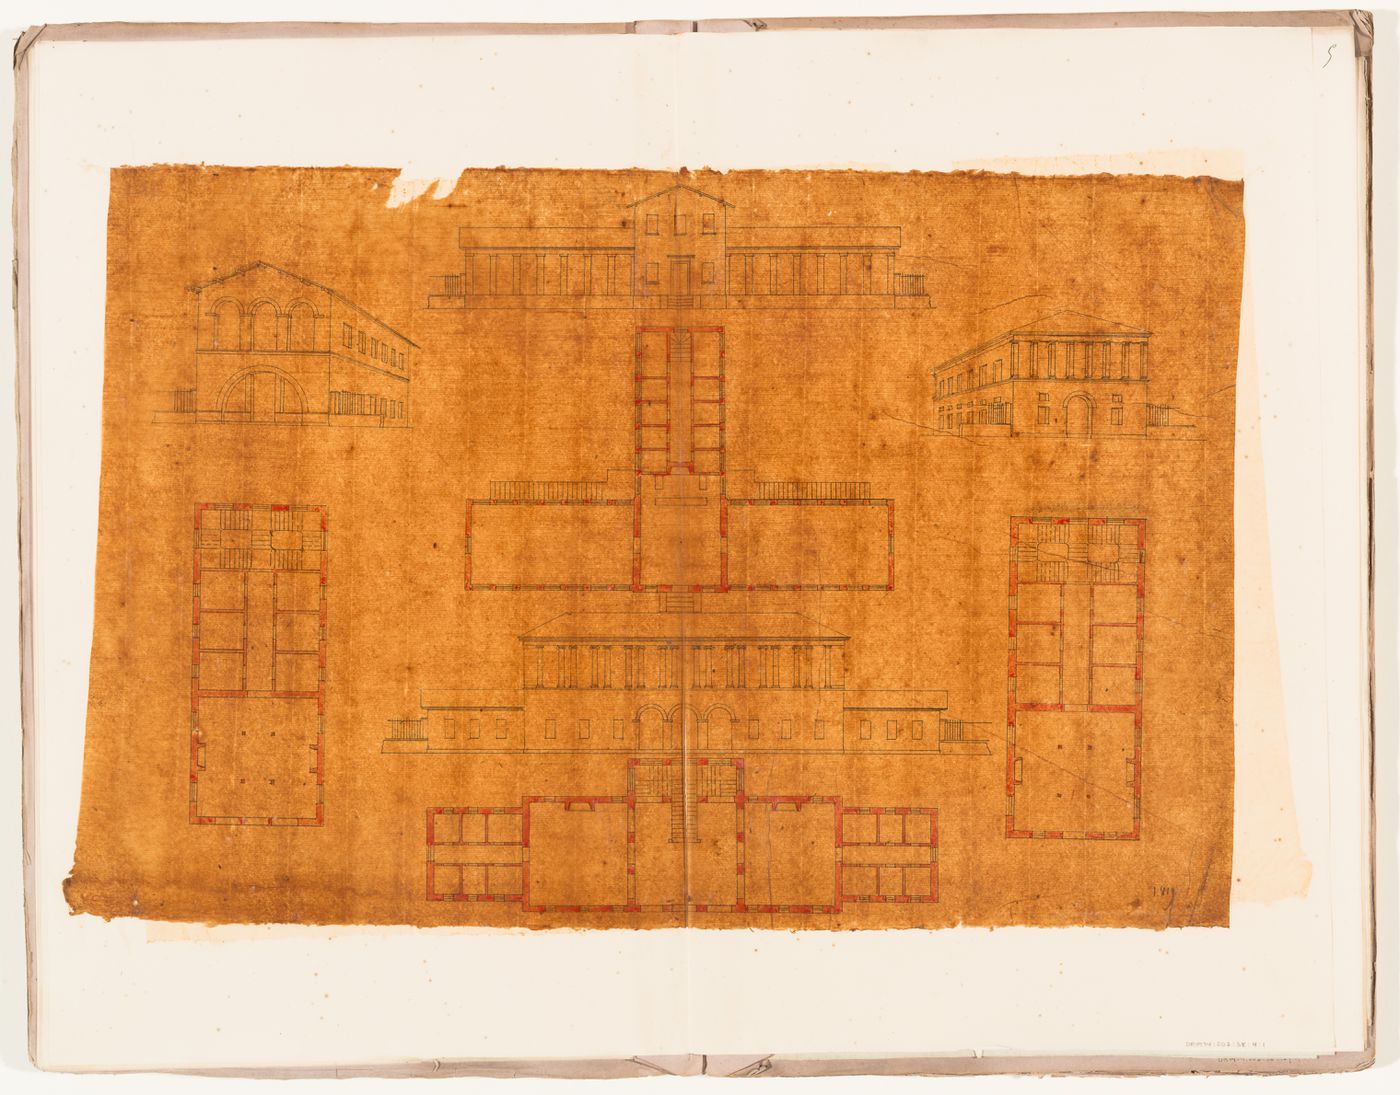 Plans, elevations and perspective drawings for buildings for M. Brodelet near Vincennes